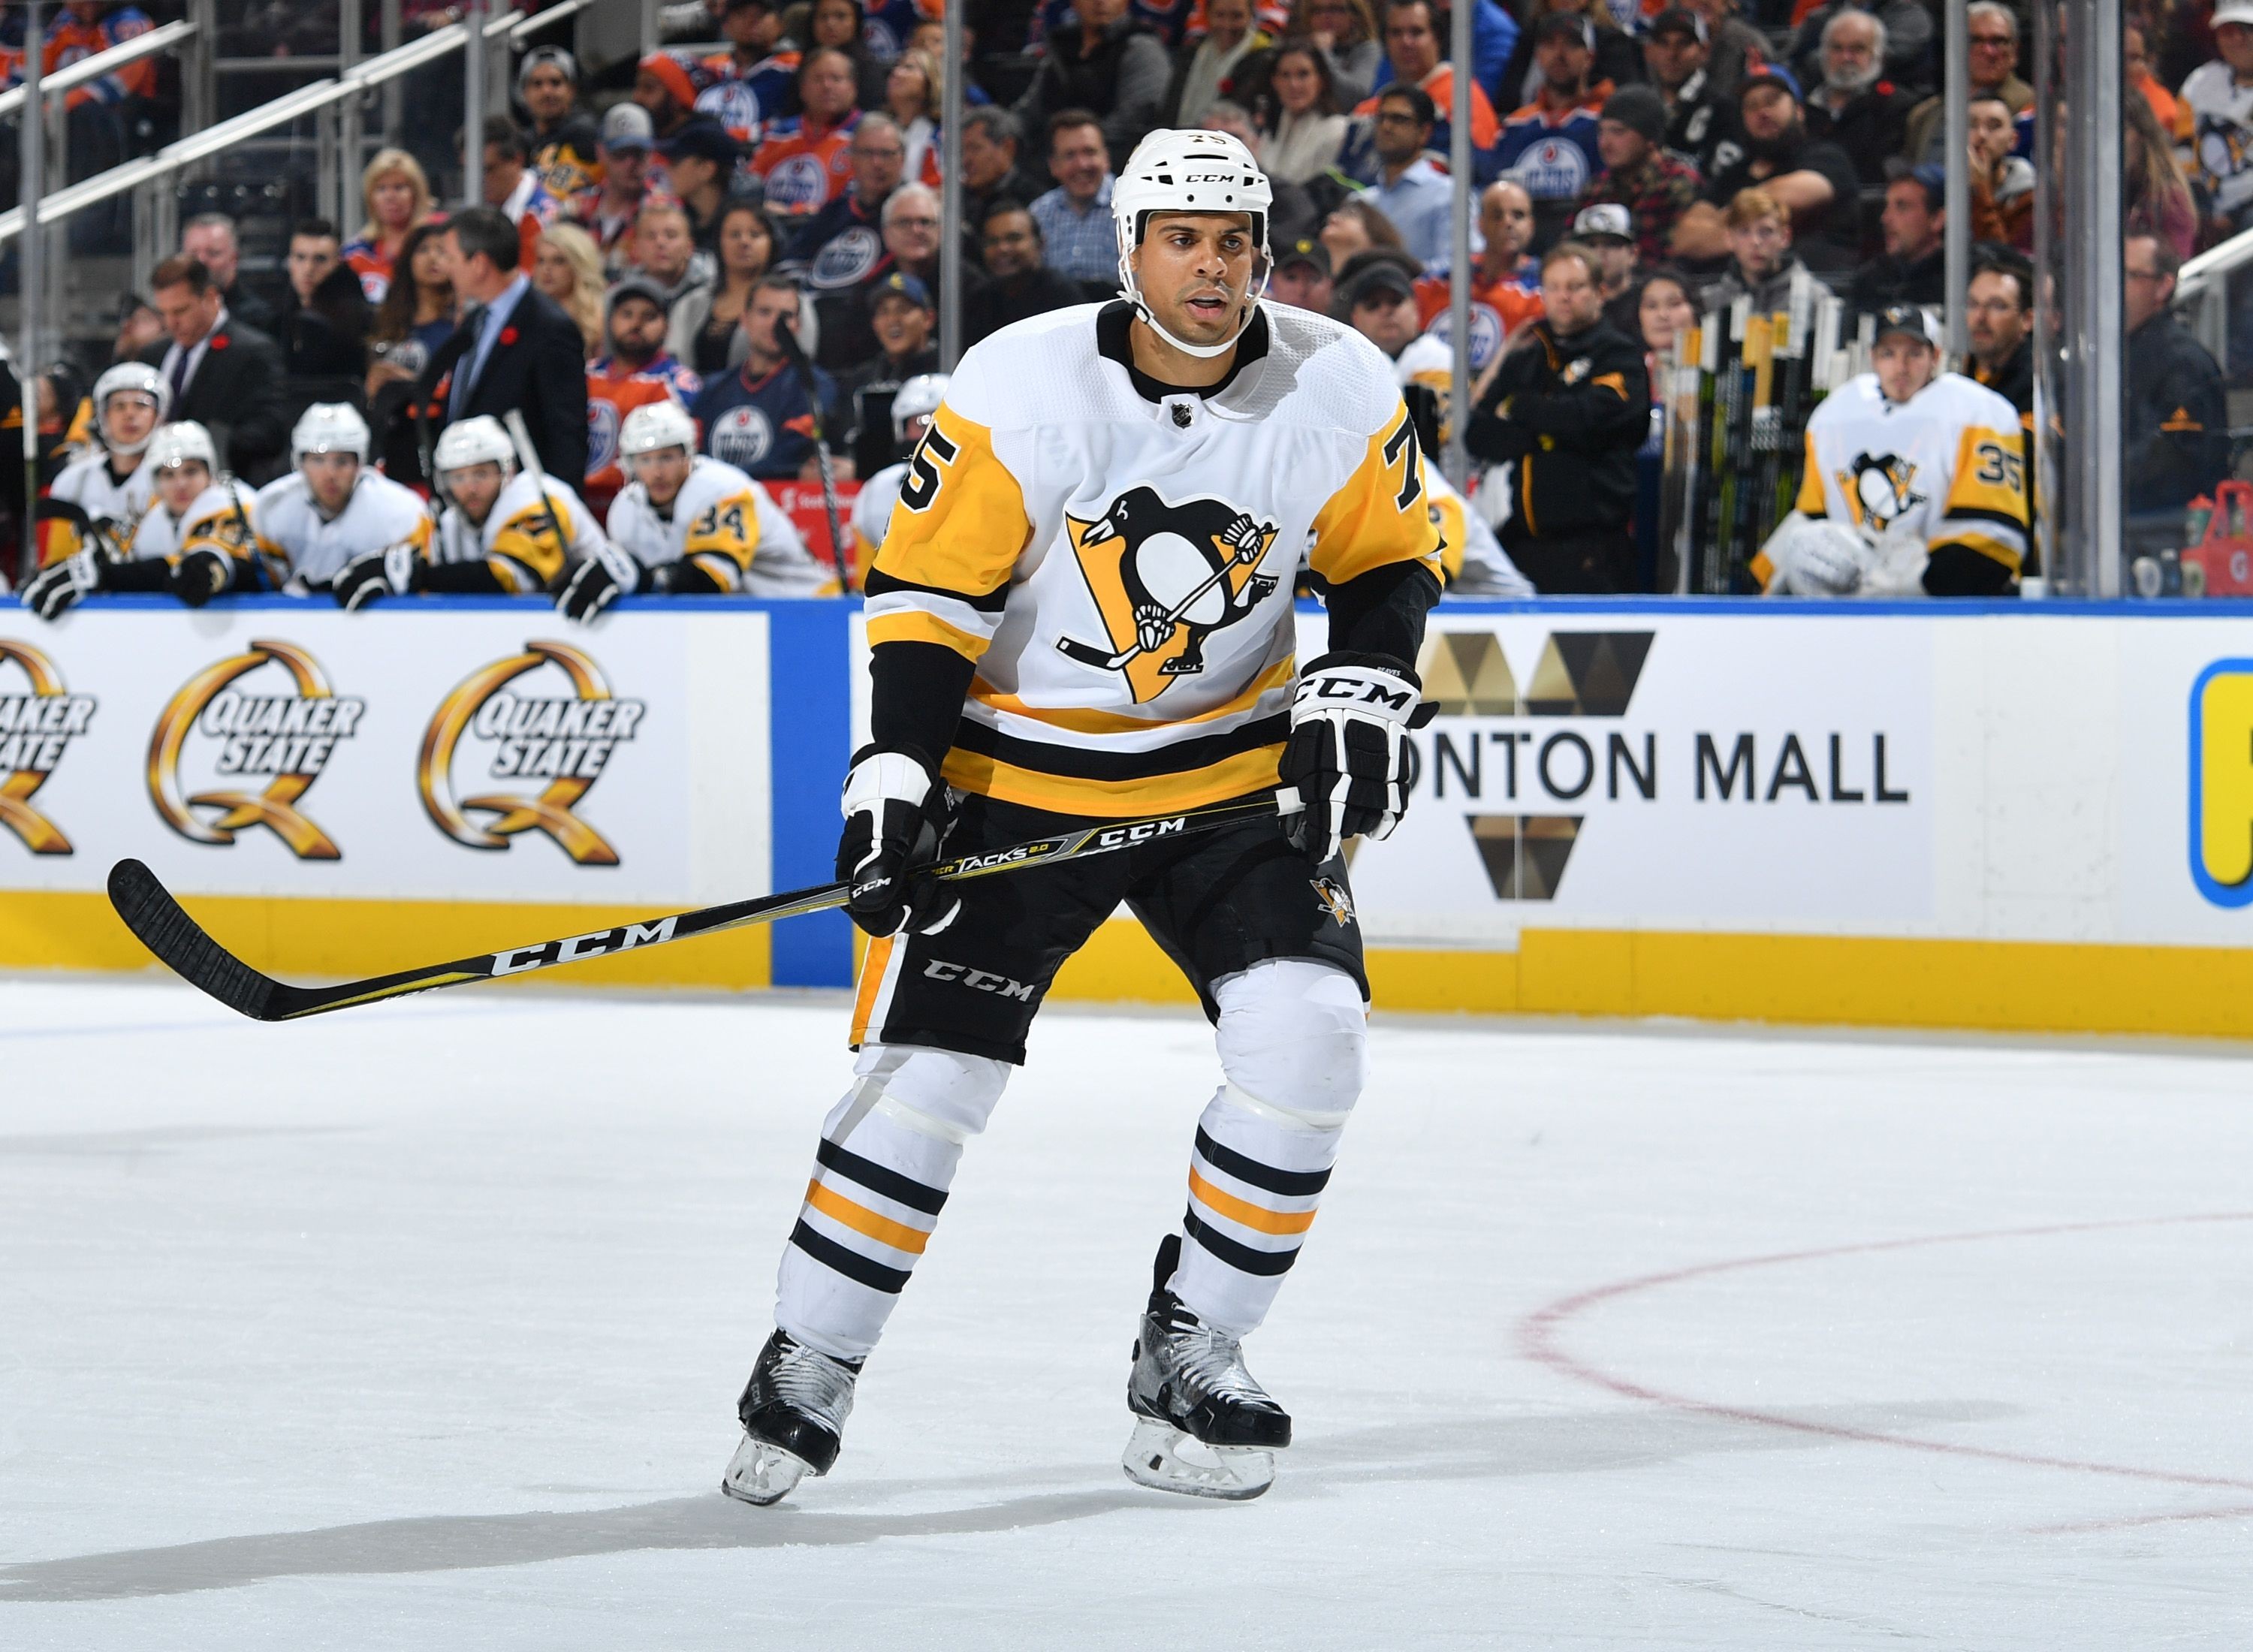 The pittsburgh penguins foundation offers programs and activities to introd...